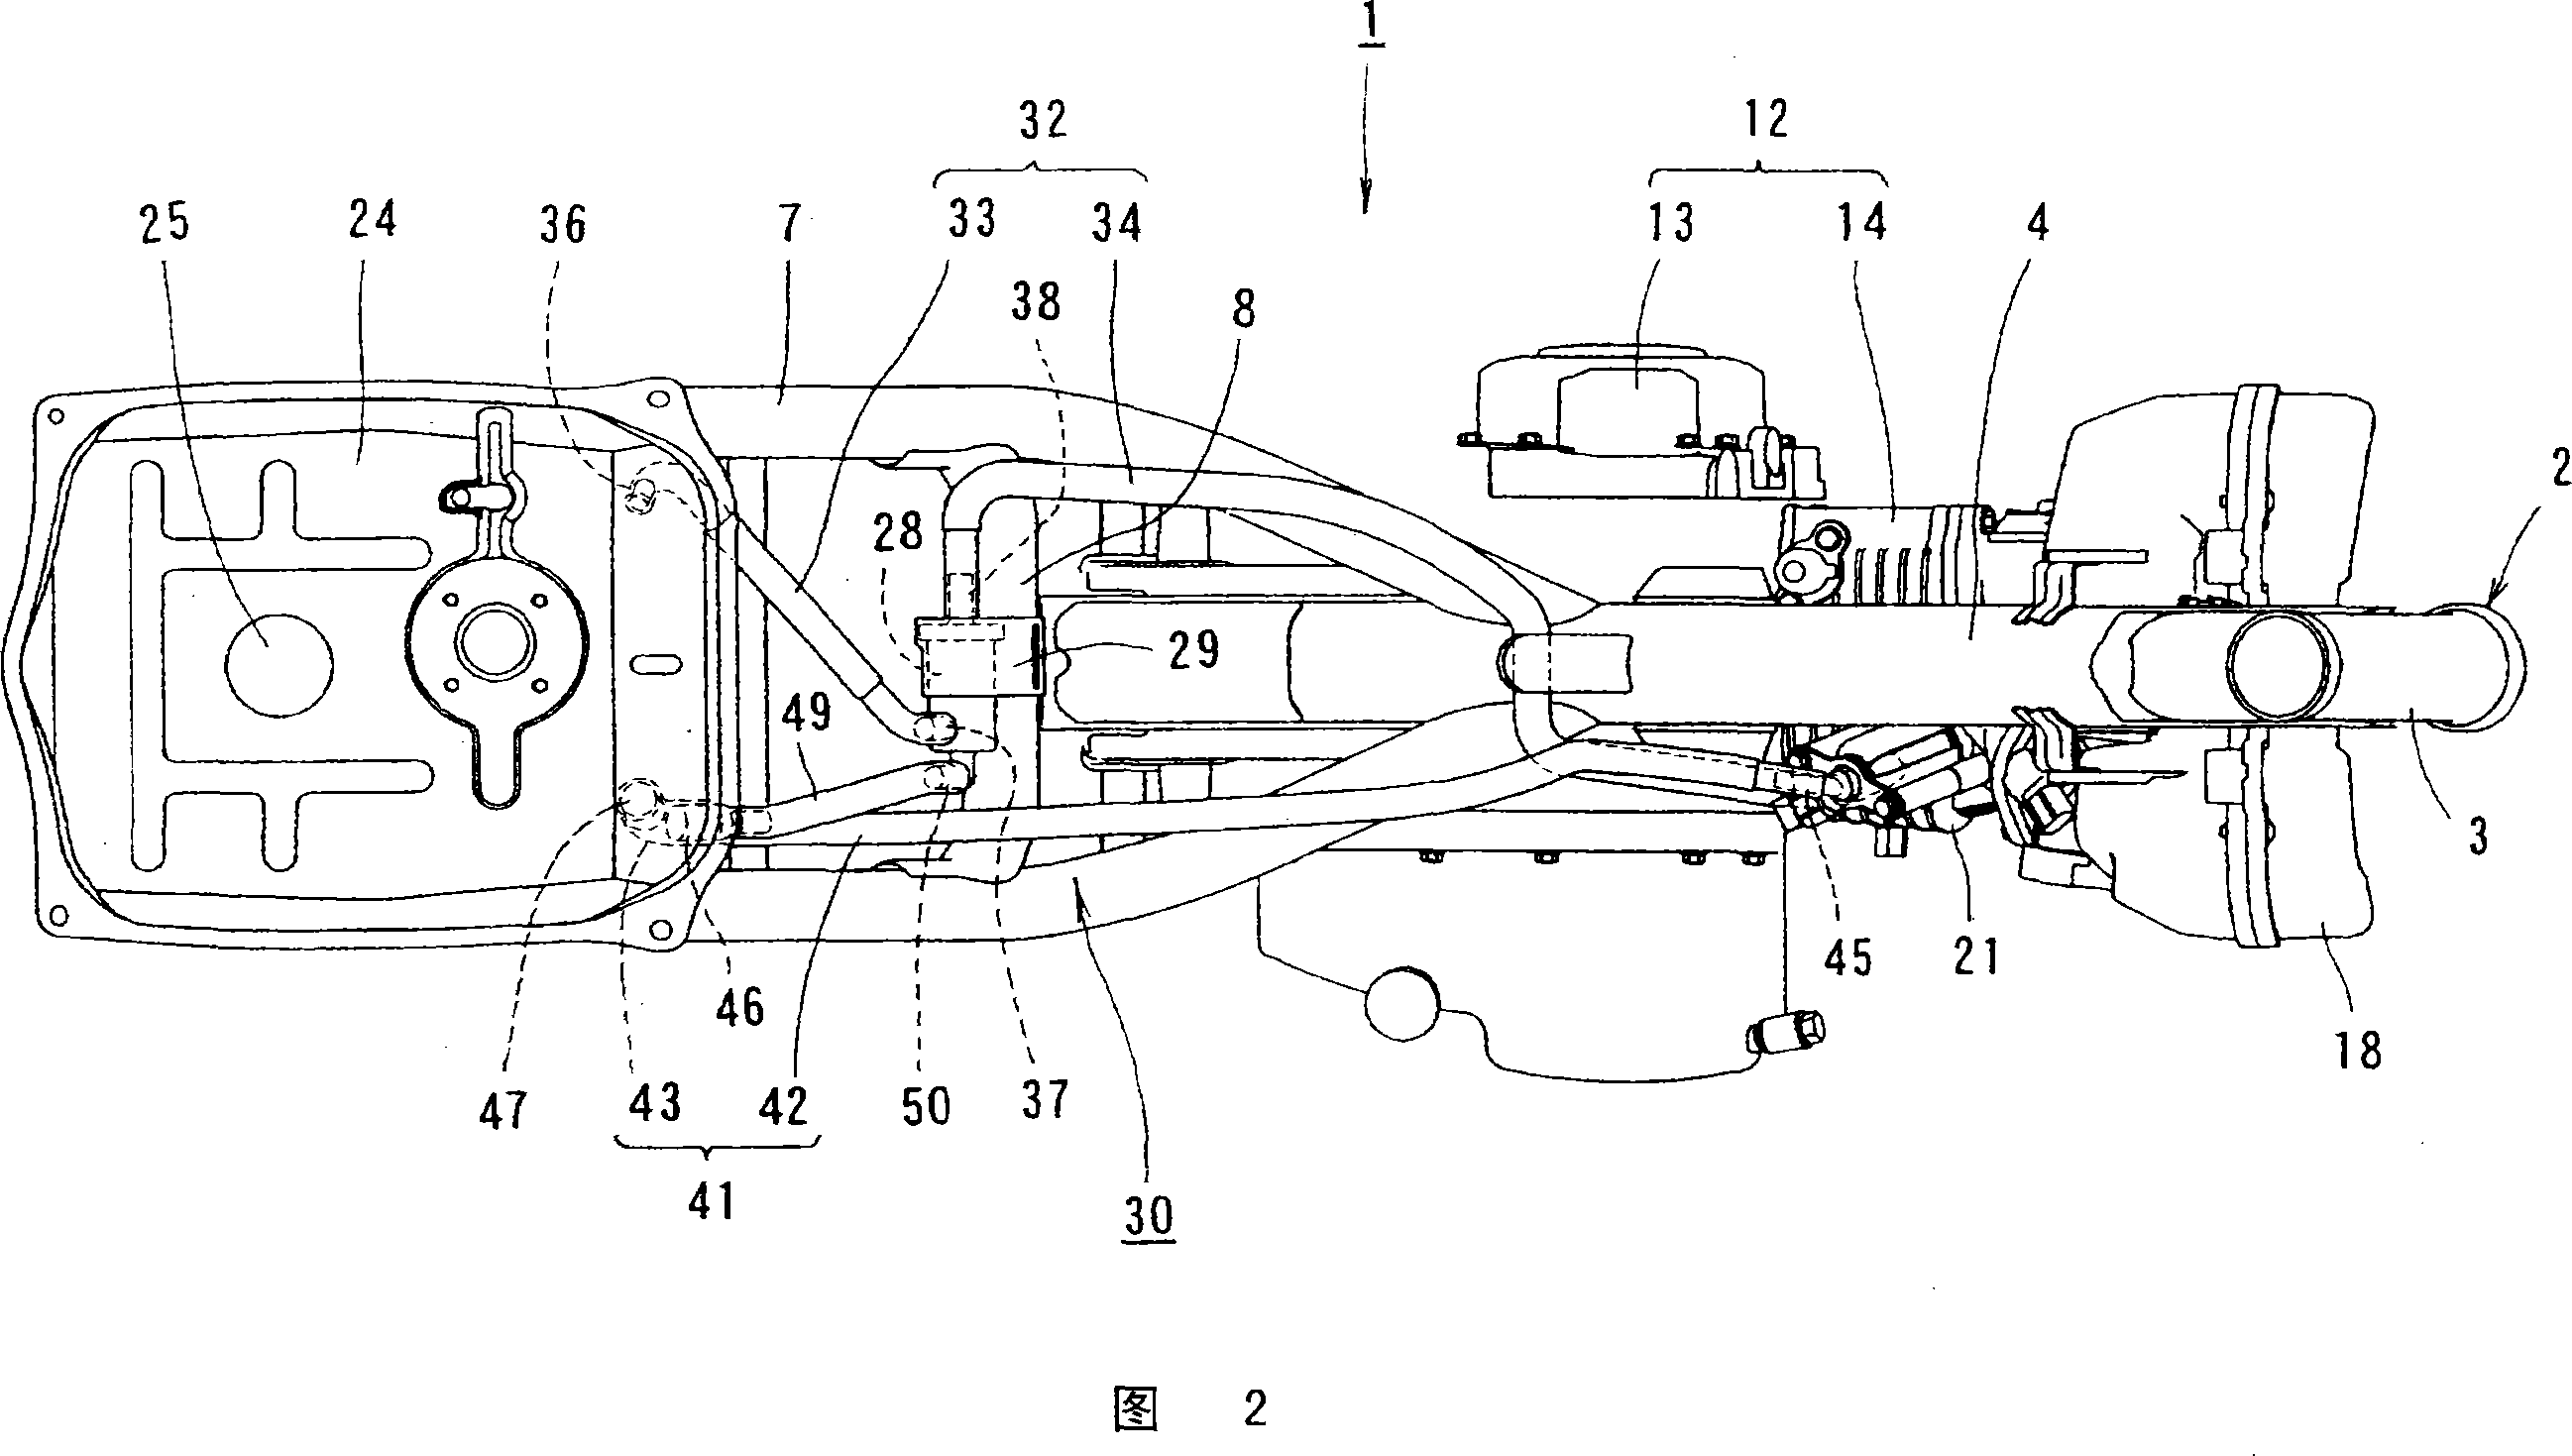 Fuel feeding device for motorcycle